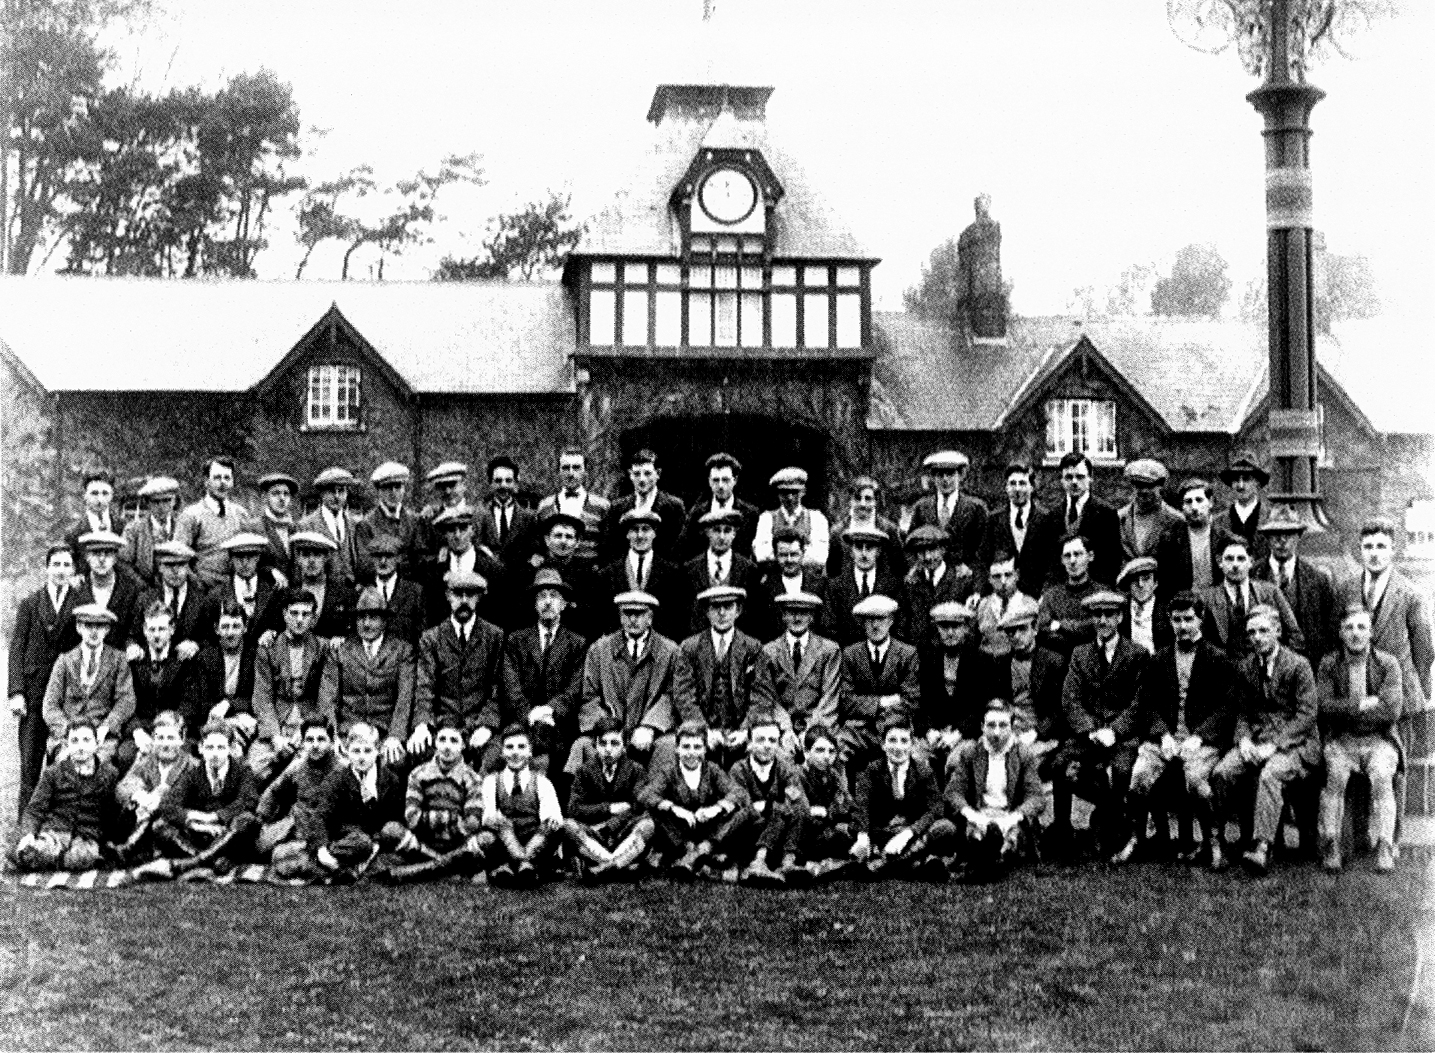 The retirement of Alex Taylor junior in 1927 at Manton Down. This ended almost sixty years of training horses there by the Taylors. The style of building is very typical of racing stables built around the turn of the century in the UK